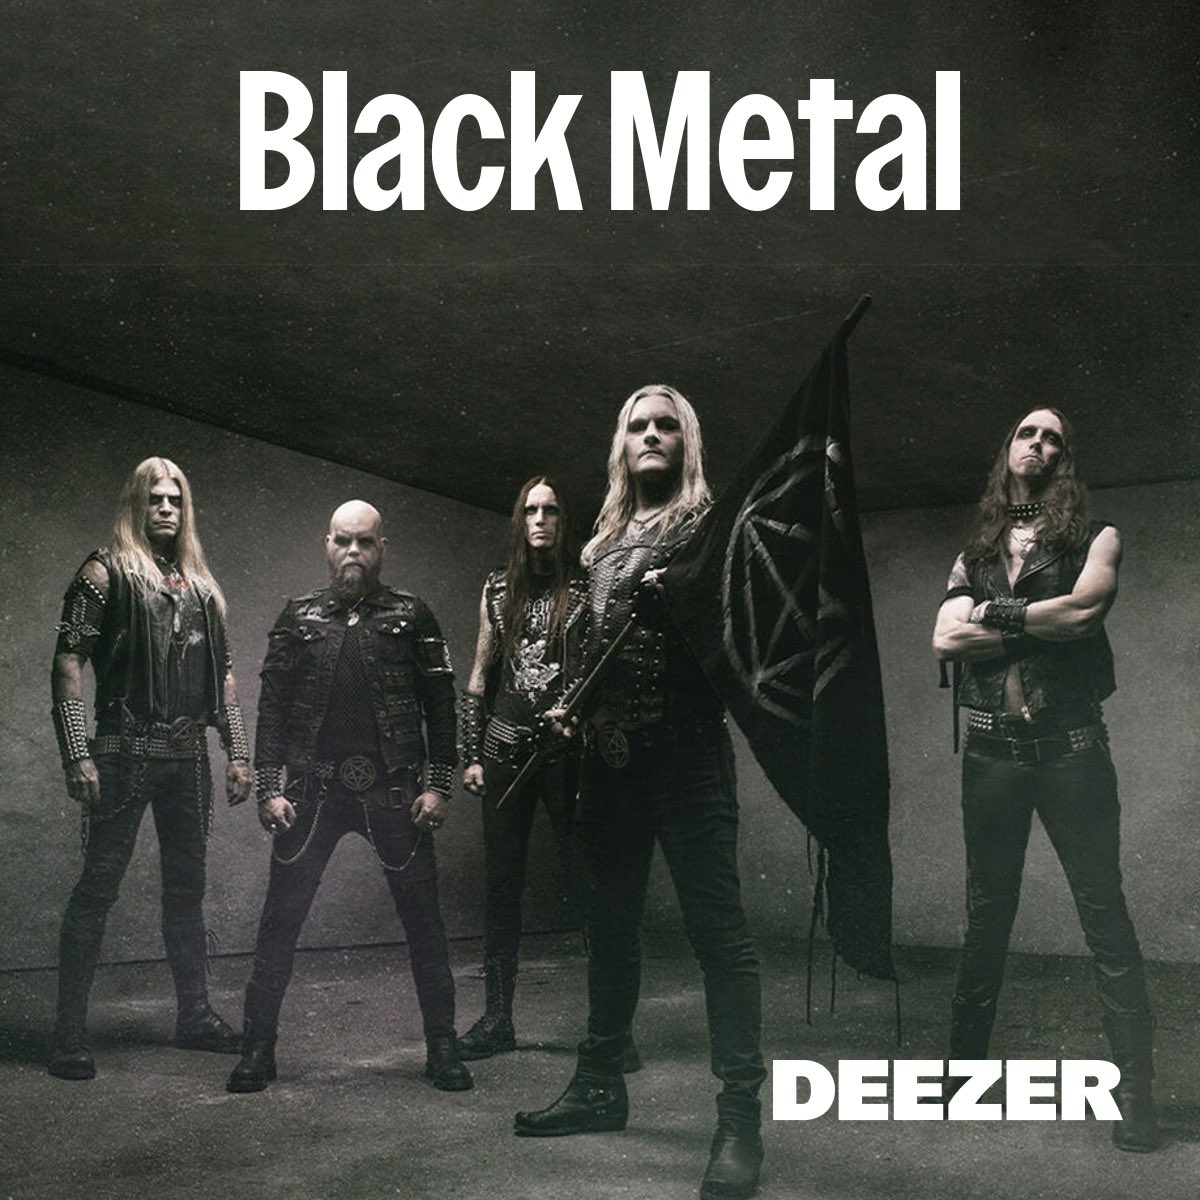 We feel honoured! Once again we are chosen to grace the cover of a playlist. This time it’s for the new playlist Black Metal, by music streaming platform @Deezer 🤘 Link to the playlist: deezer.page.link/vMvrhtkZan2gZR…